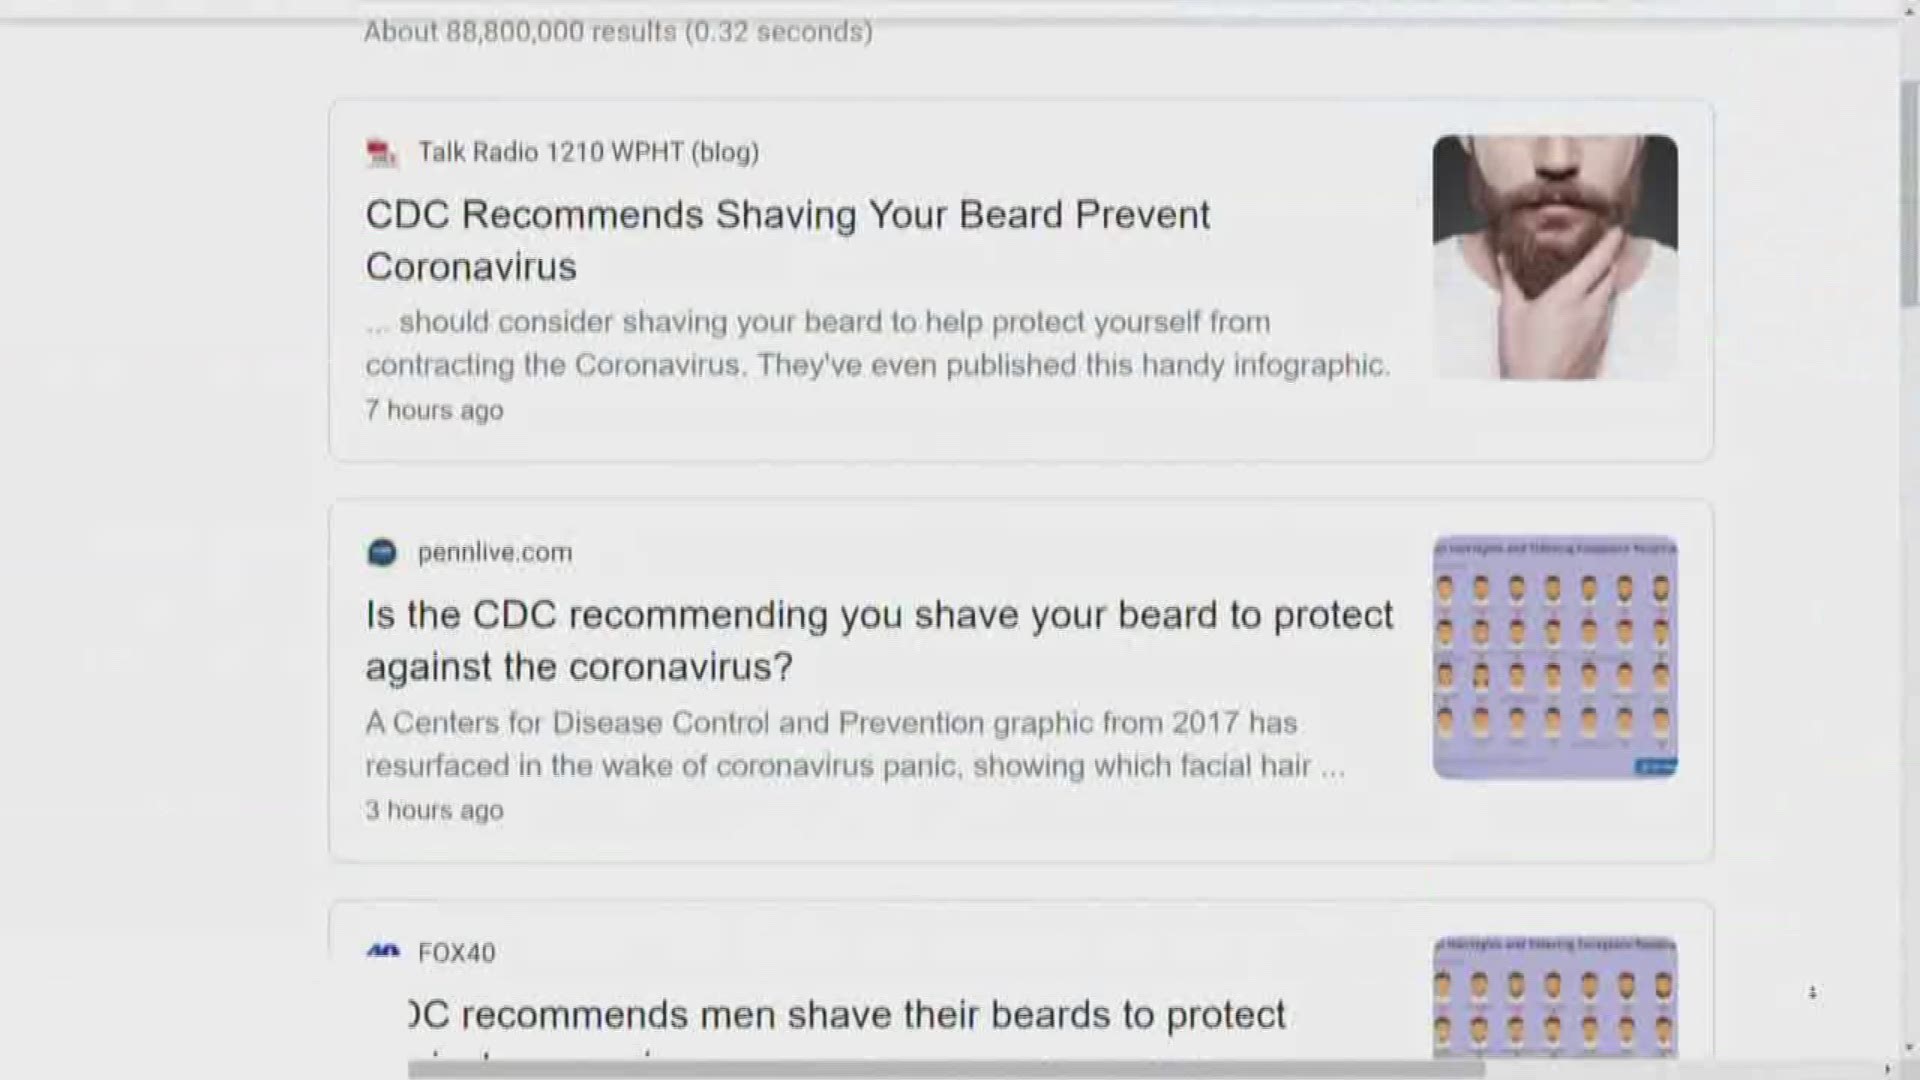 The infographic regarding facial hair and masks was posted in 2017 and is unrelated to the current virus outbreak.